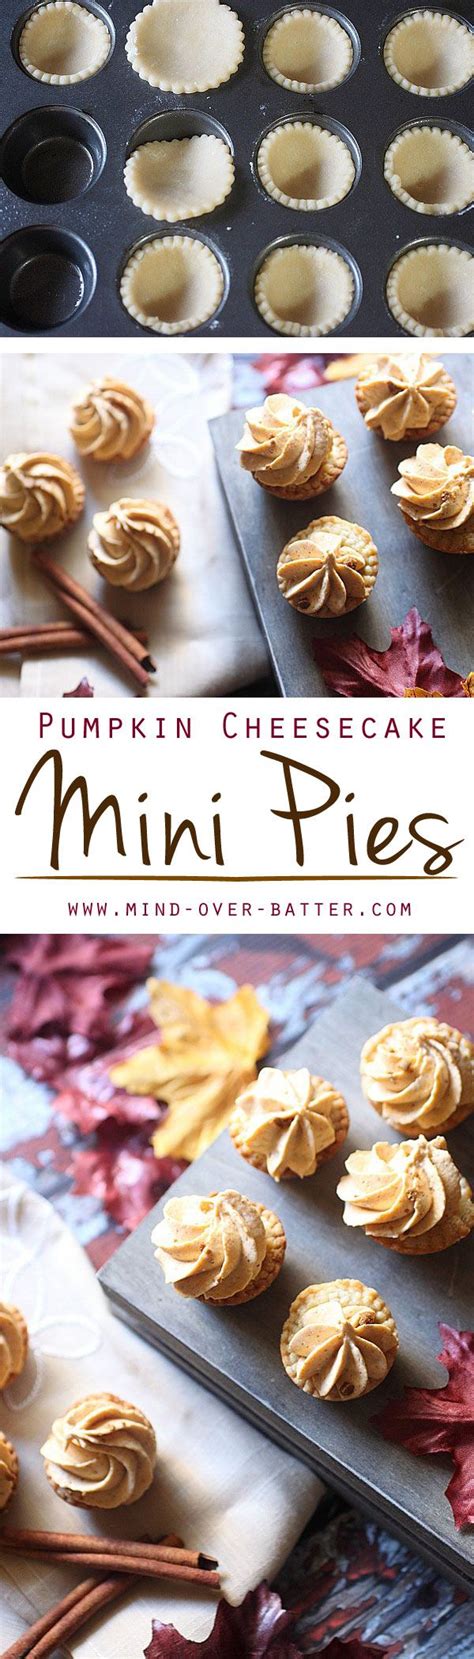 They involve roasting fresh pumpkin, which is indeed very fresh and seasonal this time. Easy Quick Pumpkin Pie With Cream Cheese / Easy Cream ...